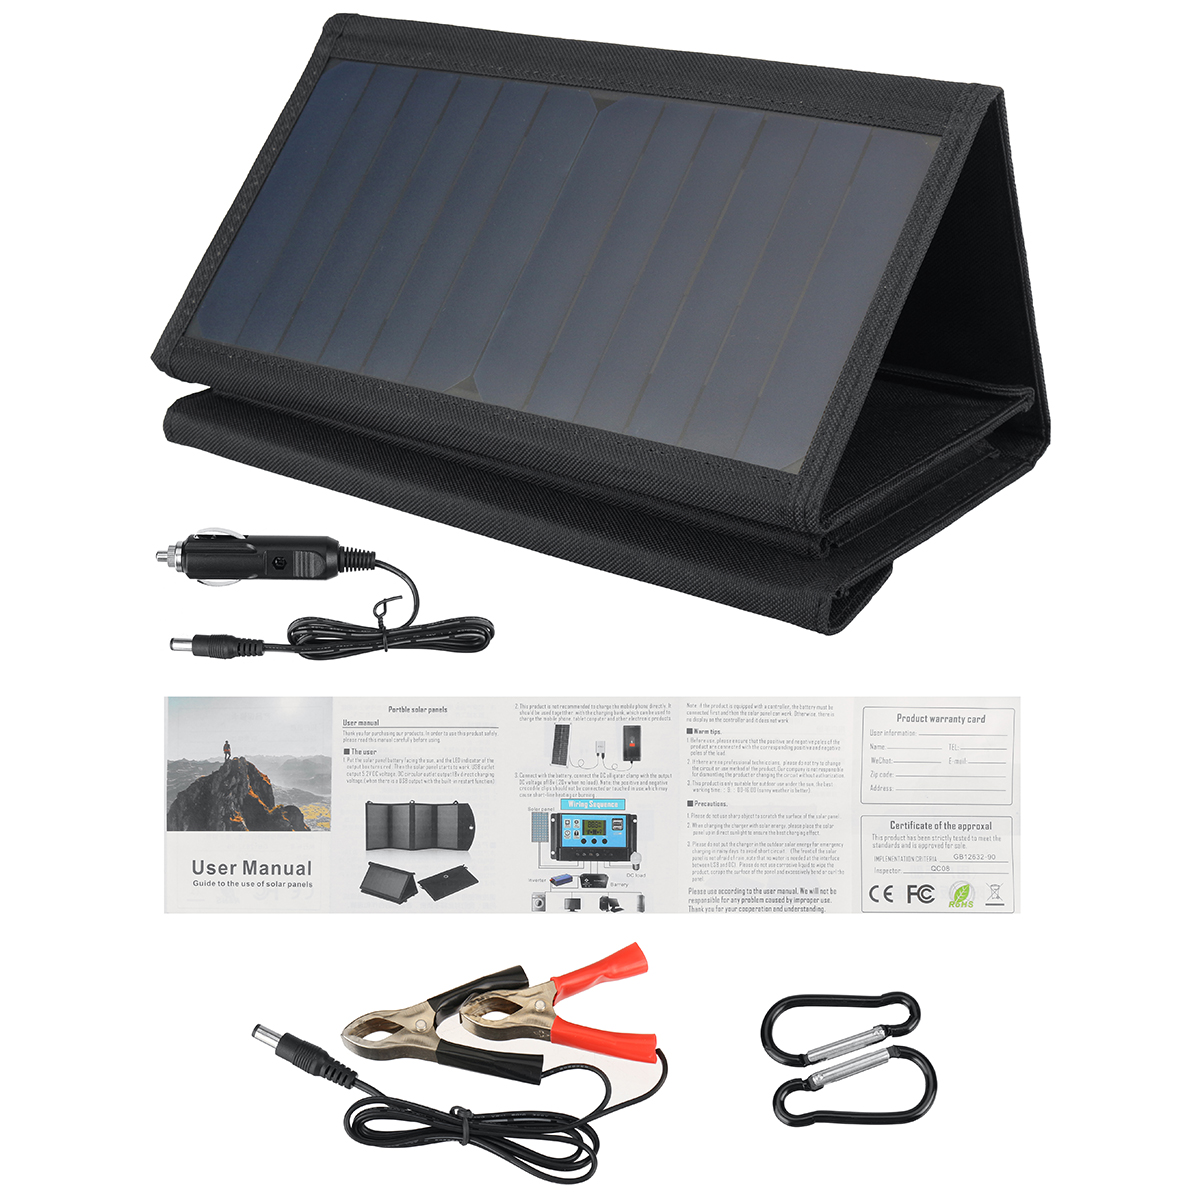 LEORY-28W-12V-Flodable-Solar-Panel-Sunpower-Cell-Panel-Solar-Charger-Generator-for-Smartphone-Tablet-1880494-5